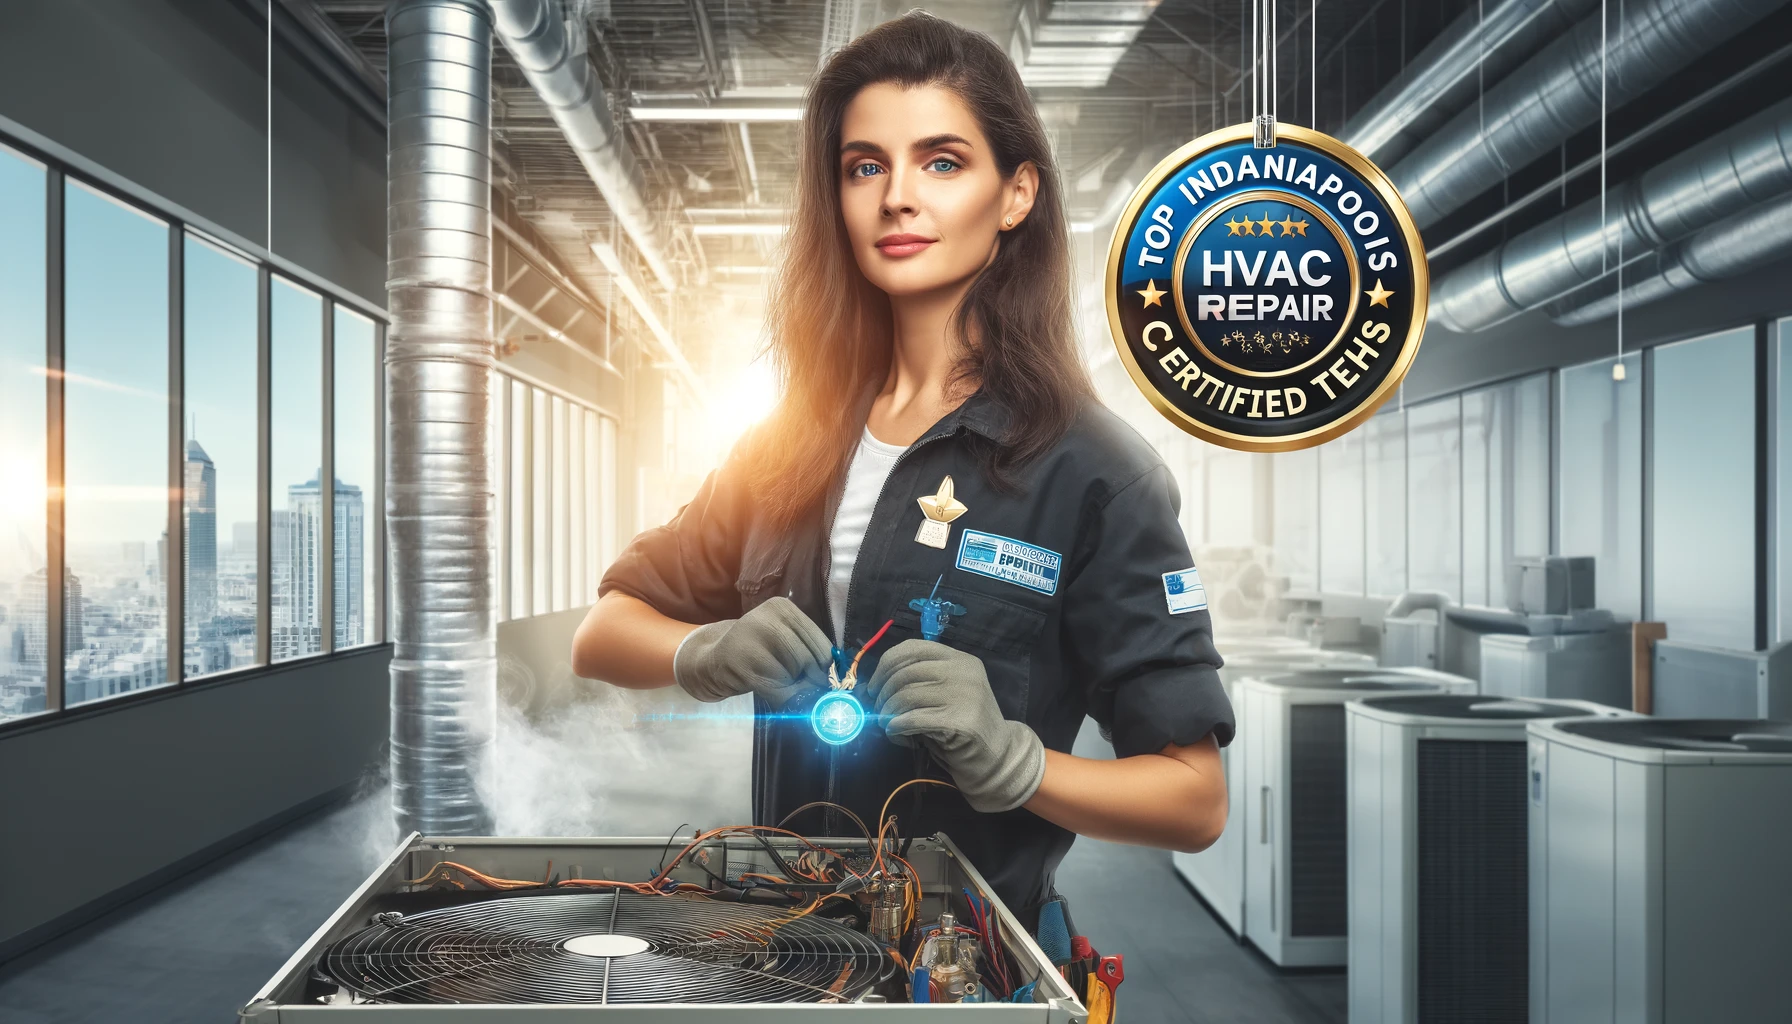 Hispanic female HVAC technician working on a system in a commercial building.